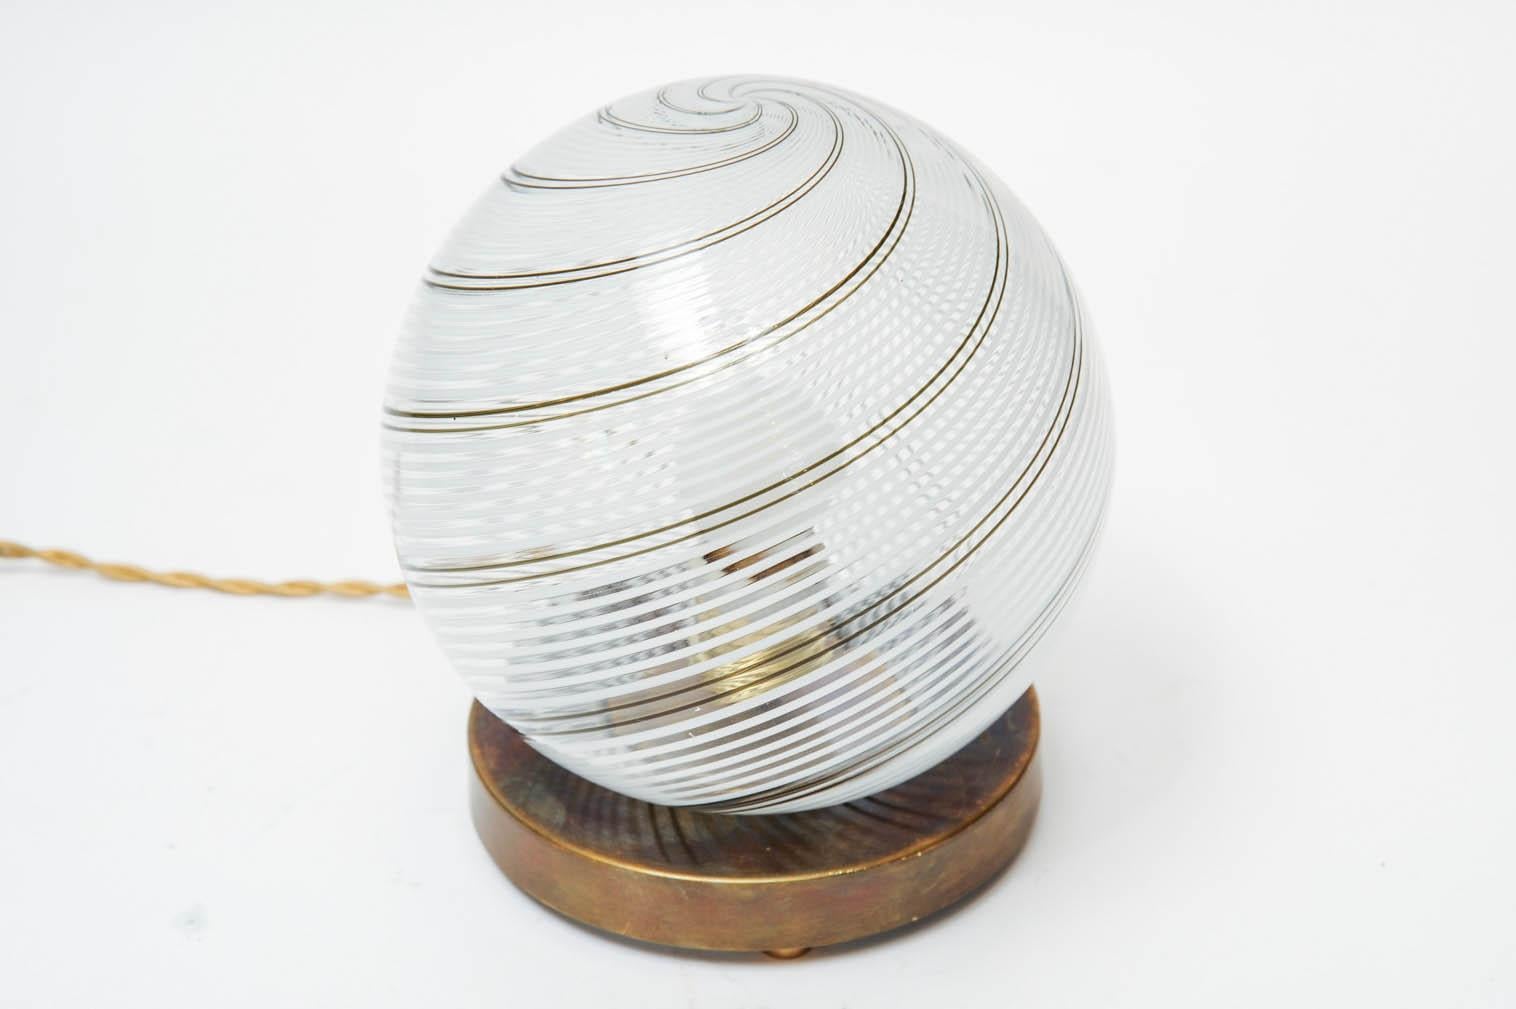 Table lamp made of a patinated brass circular foot with original stamp, topped with a small Murano glass globes with the typical Venini swirl stripes.